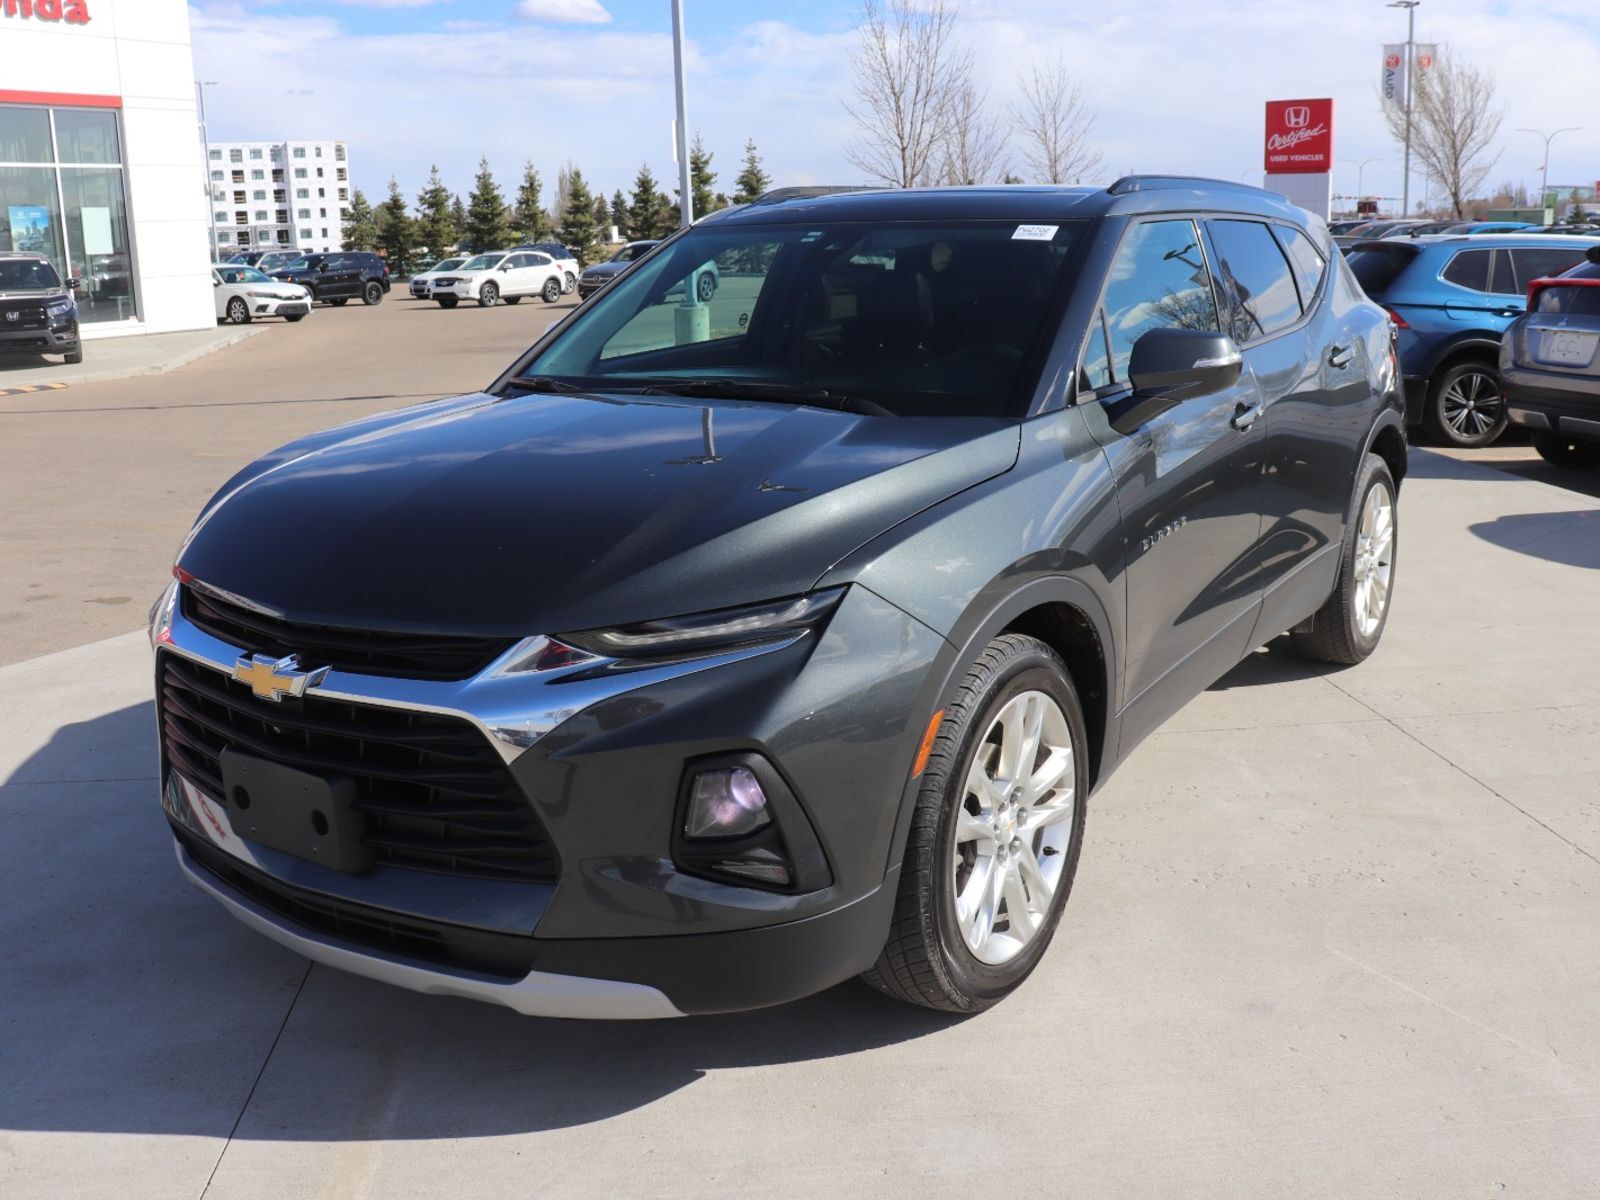 2019 Chevrolet Blazer True North 3LT: AWD/LEATHER/PANOROOF